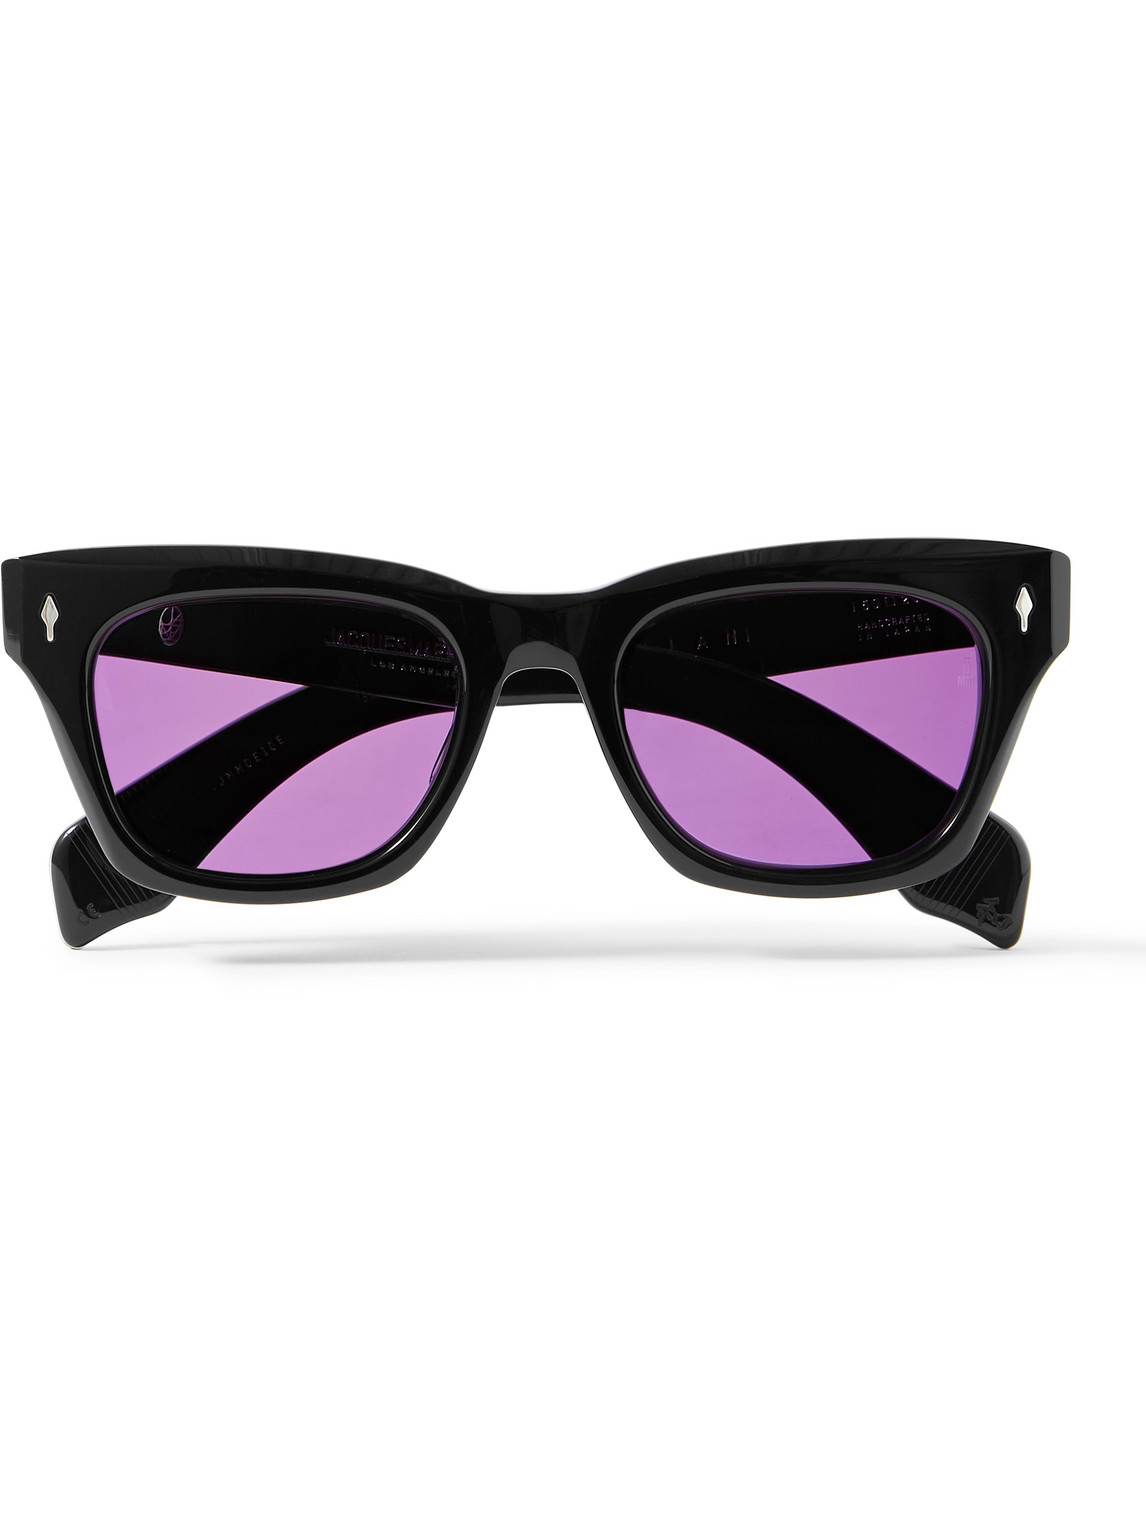 Jacques Marie Mage Dealan D-frame Acetate Sunglasses In Black